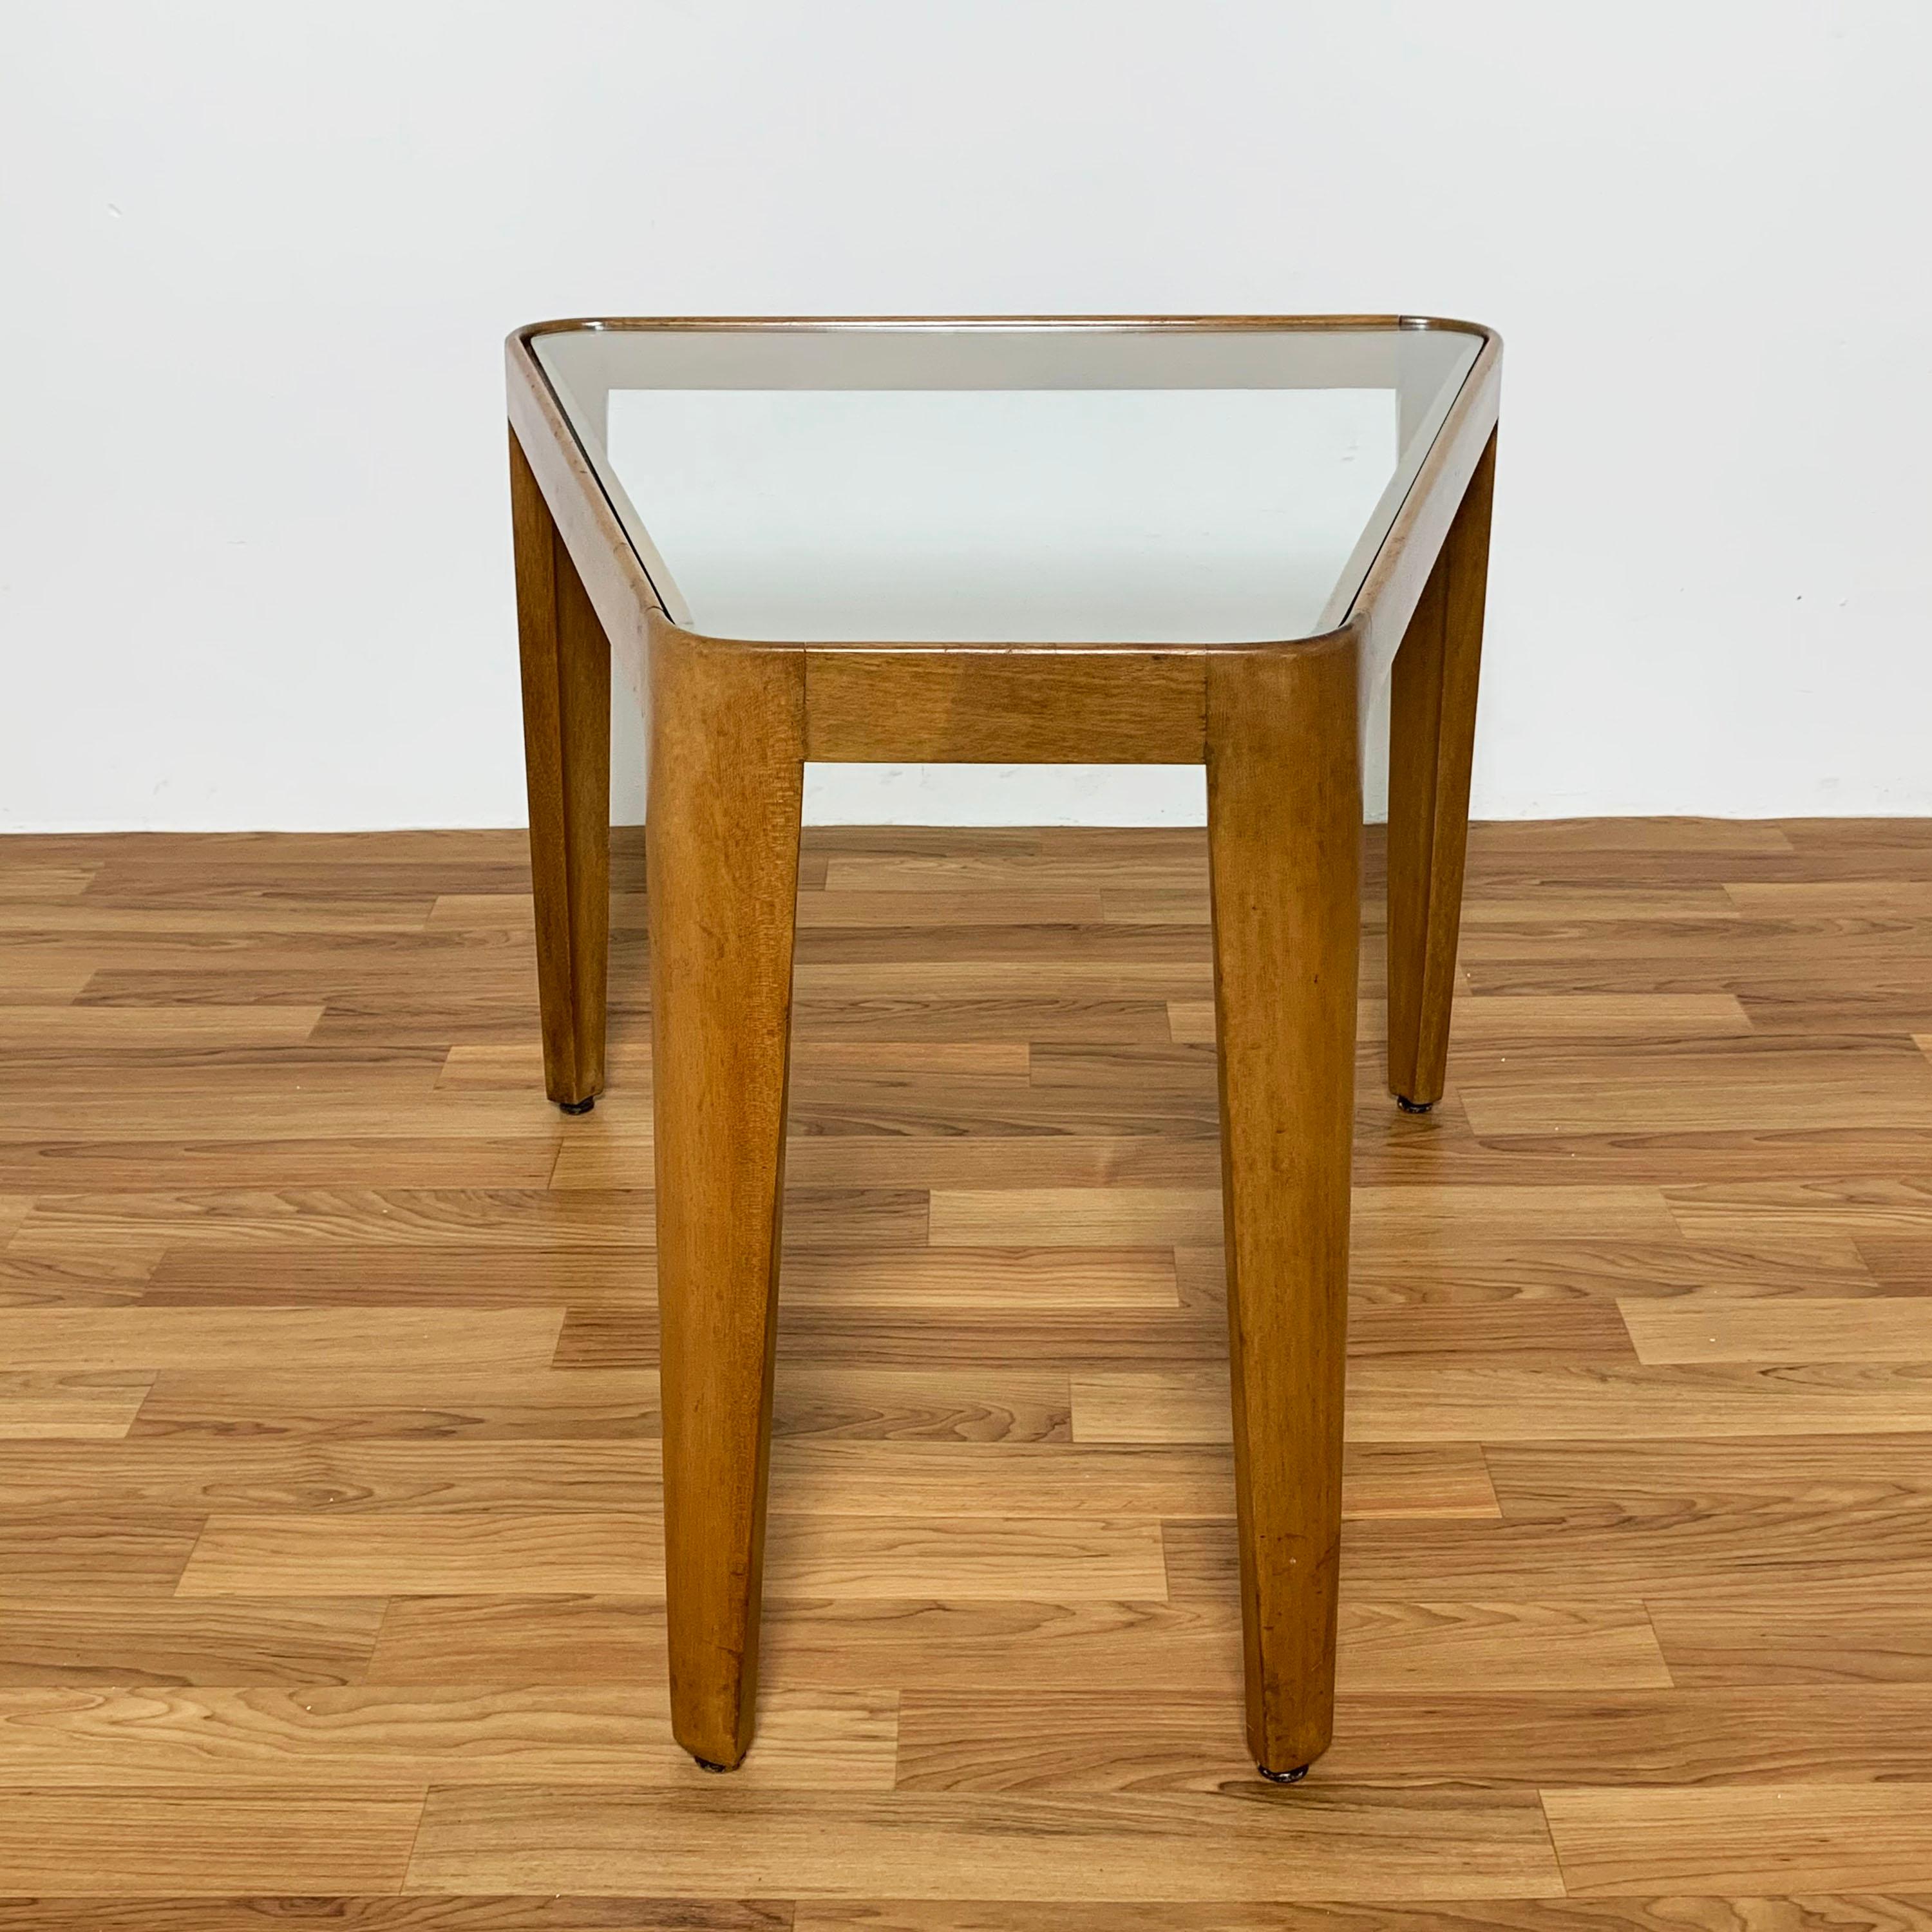 An uncommon early trapezoidal wedge shape side table in mahogany with glass top by Edward Wormley for Dunbar, ca. 1948. Model number 4809.